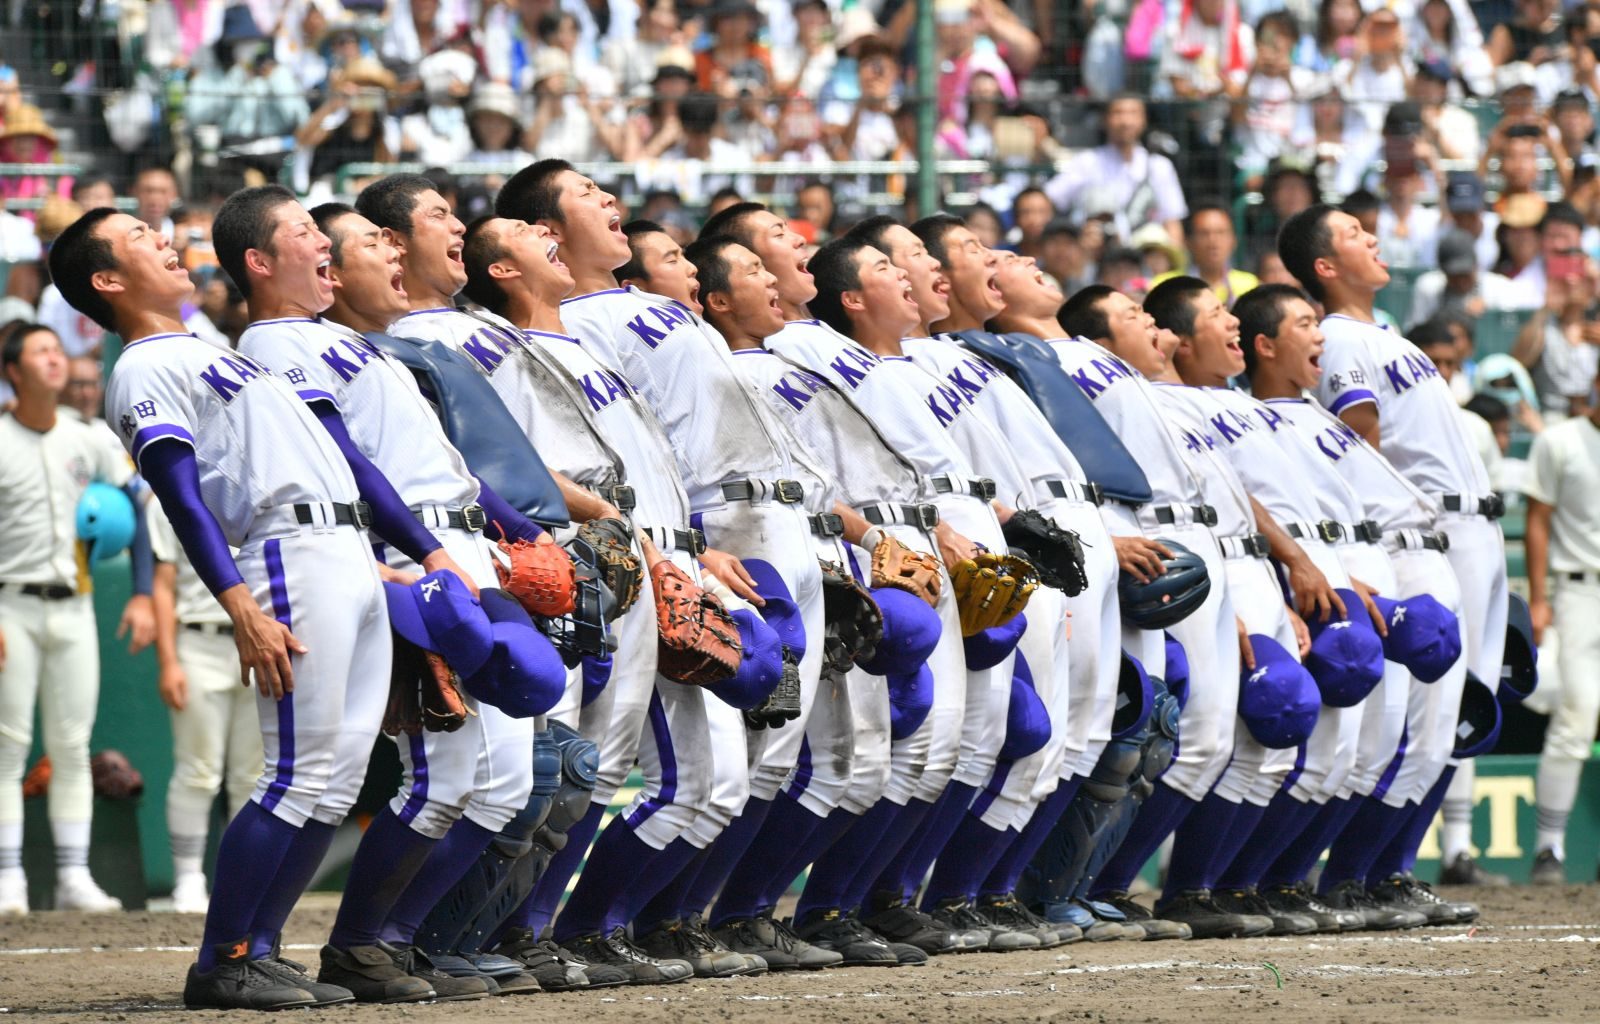 Koshien Players as 'Japanese Gods': Why We're Crazy About High School  Baseball